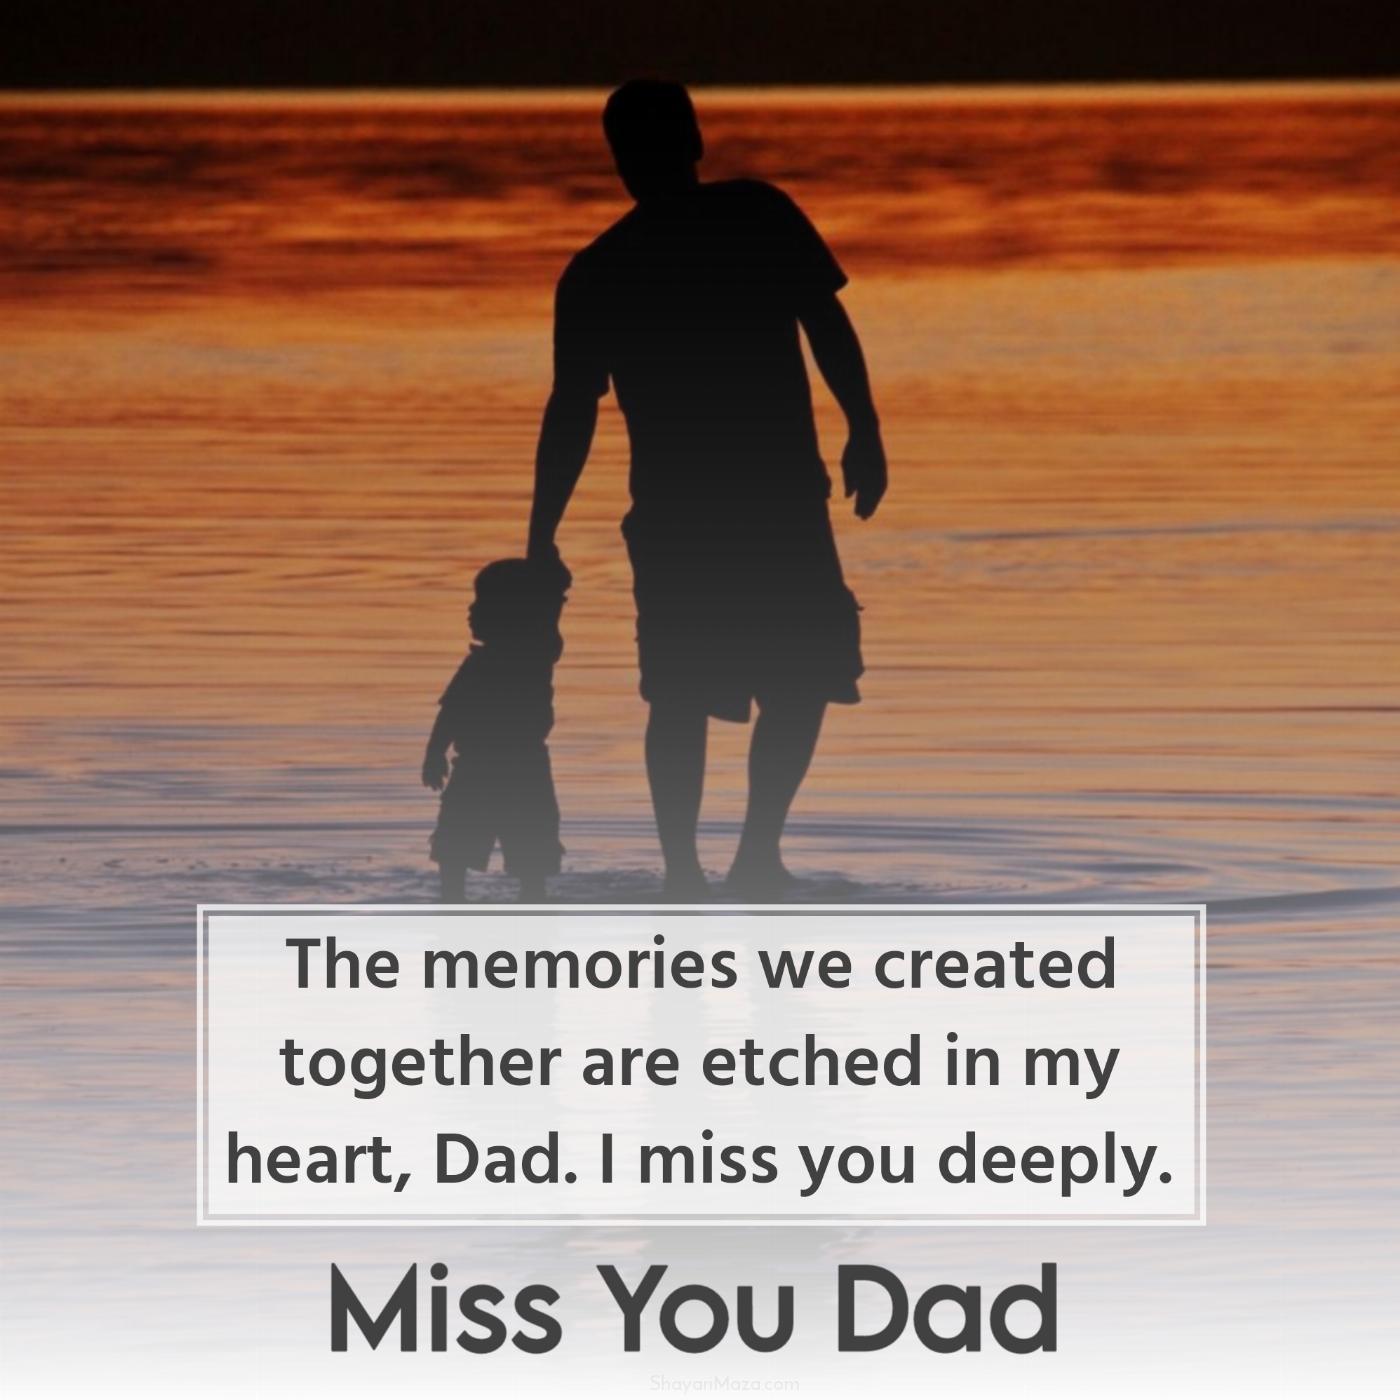 The memories we created together are etched in my heart Dad